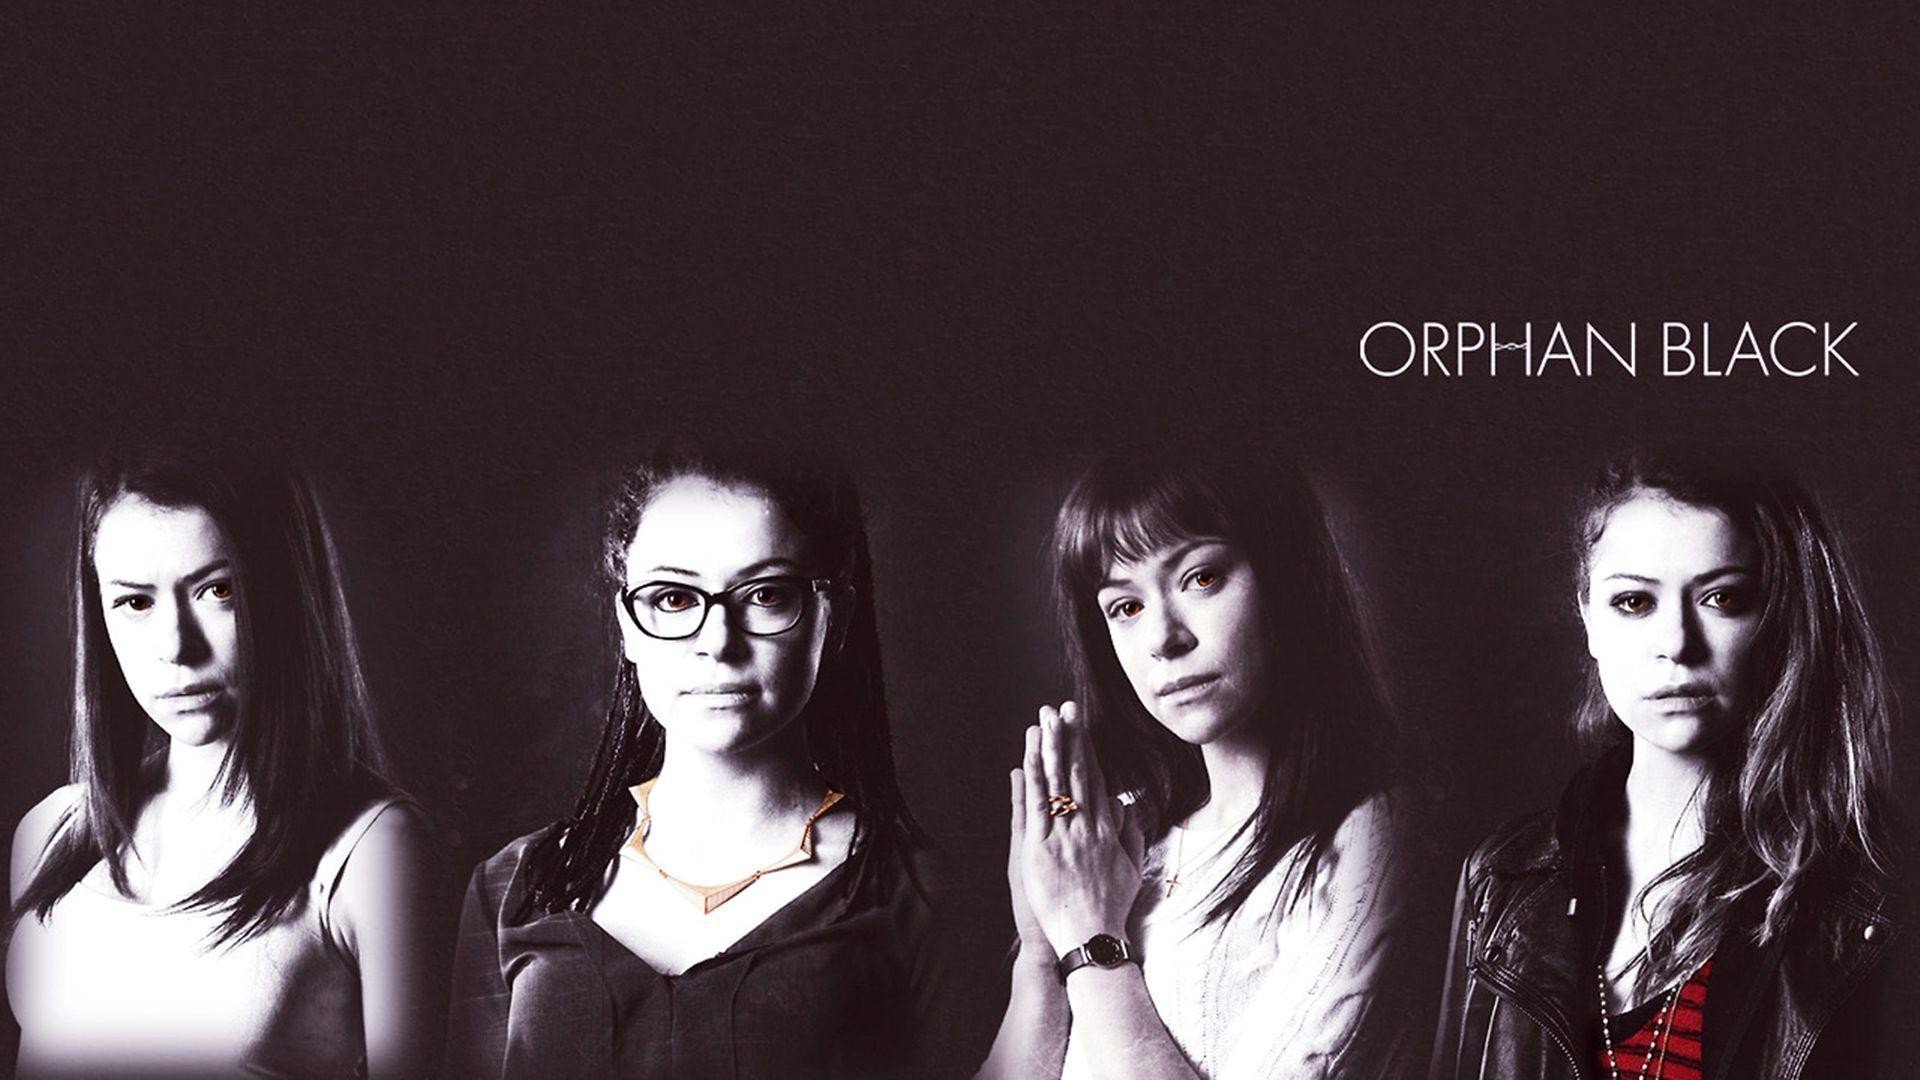 1920x1080 JUJ-993: Orphan Black Wallpapers, Pictures of Orphan Black High .